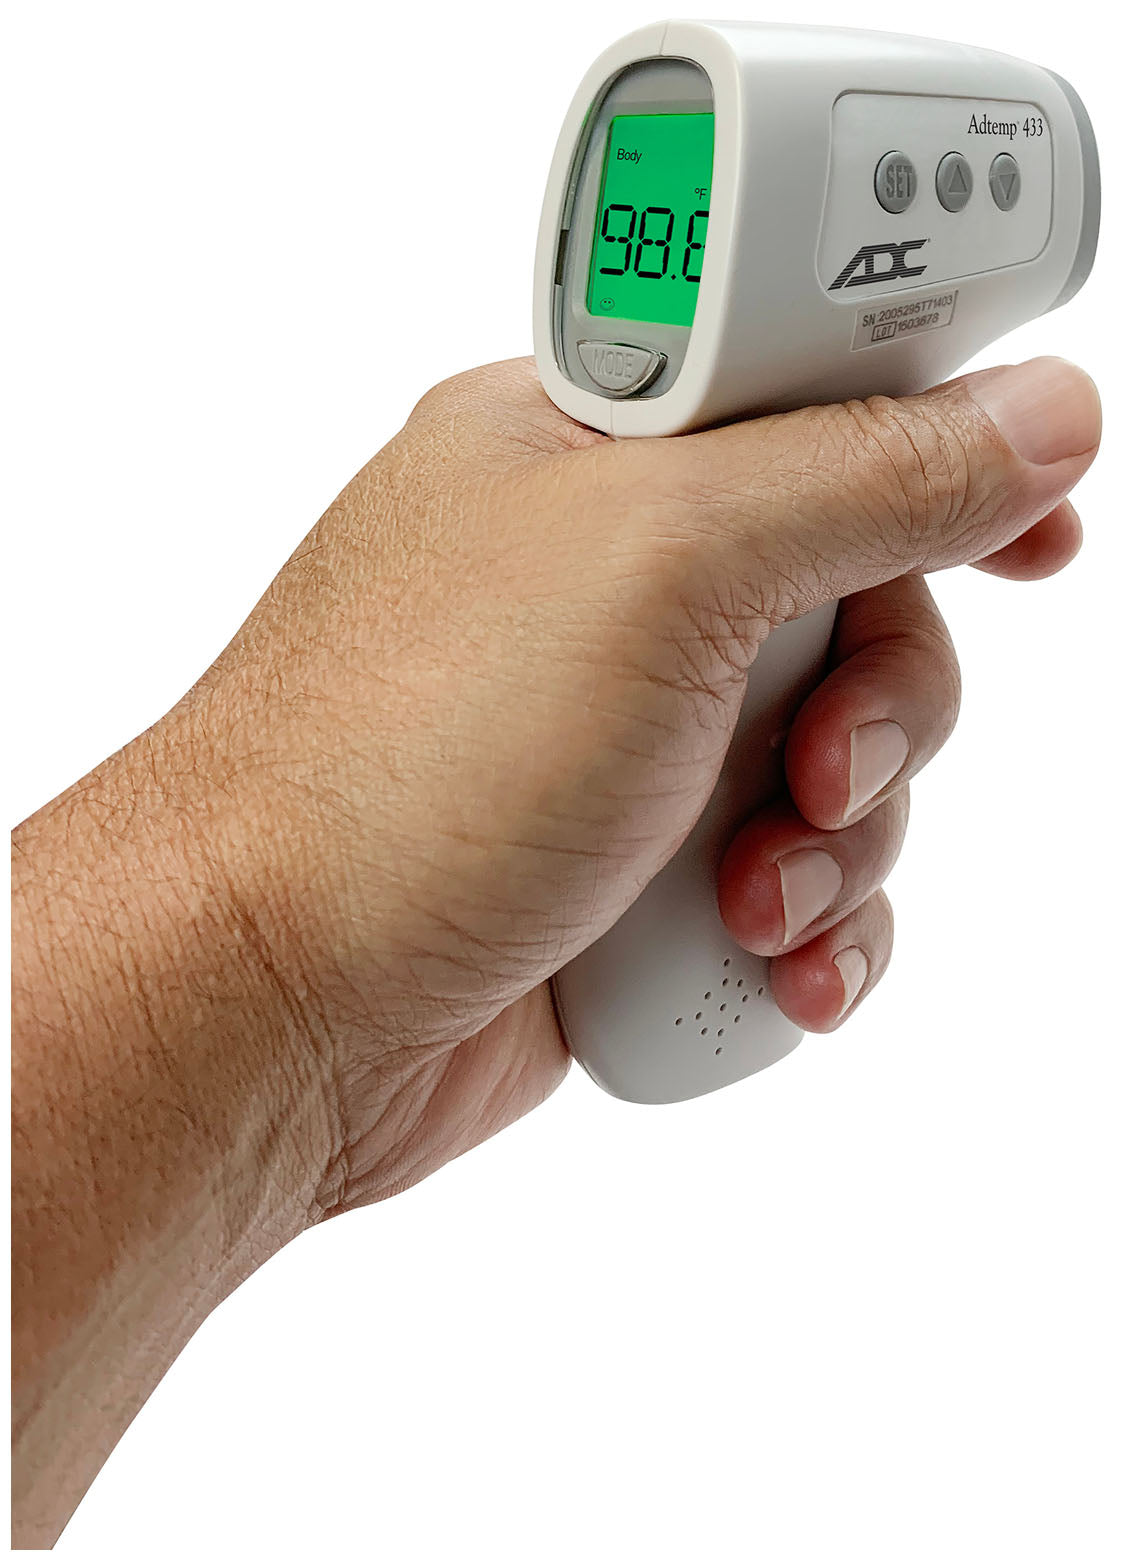 ADC Adtemp 433 Non-Contact Infrared Thermometer